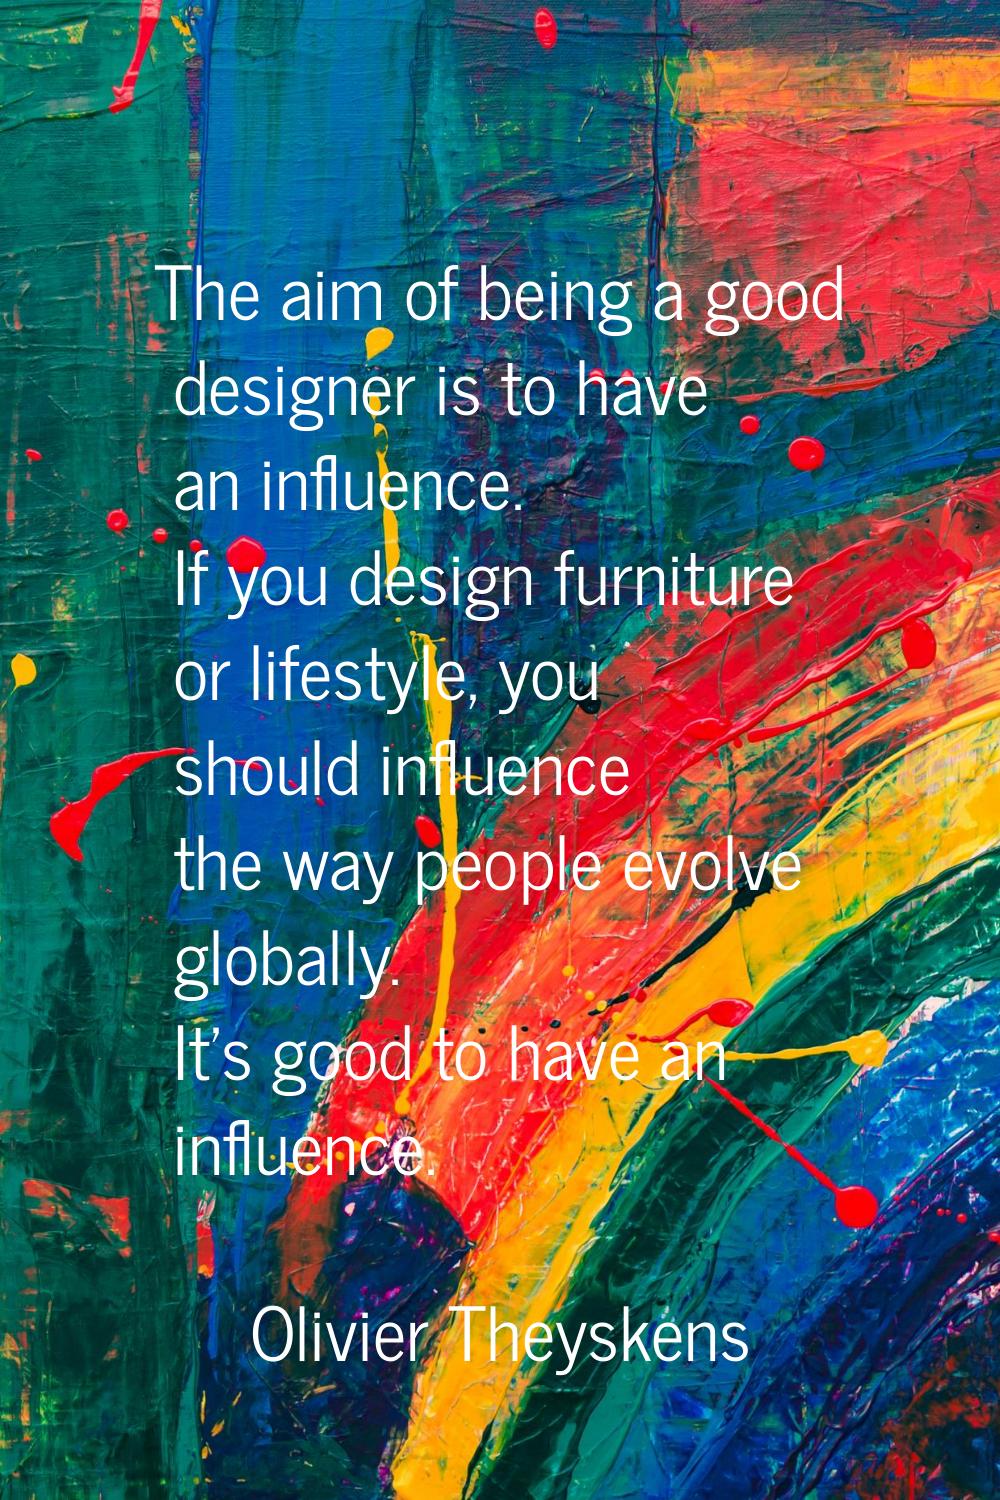 The aim of being a good designer is to have an influence. If you design furniture or lifestyle, you